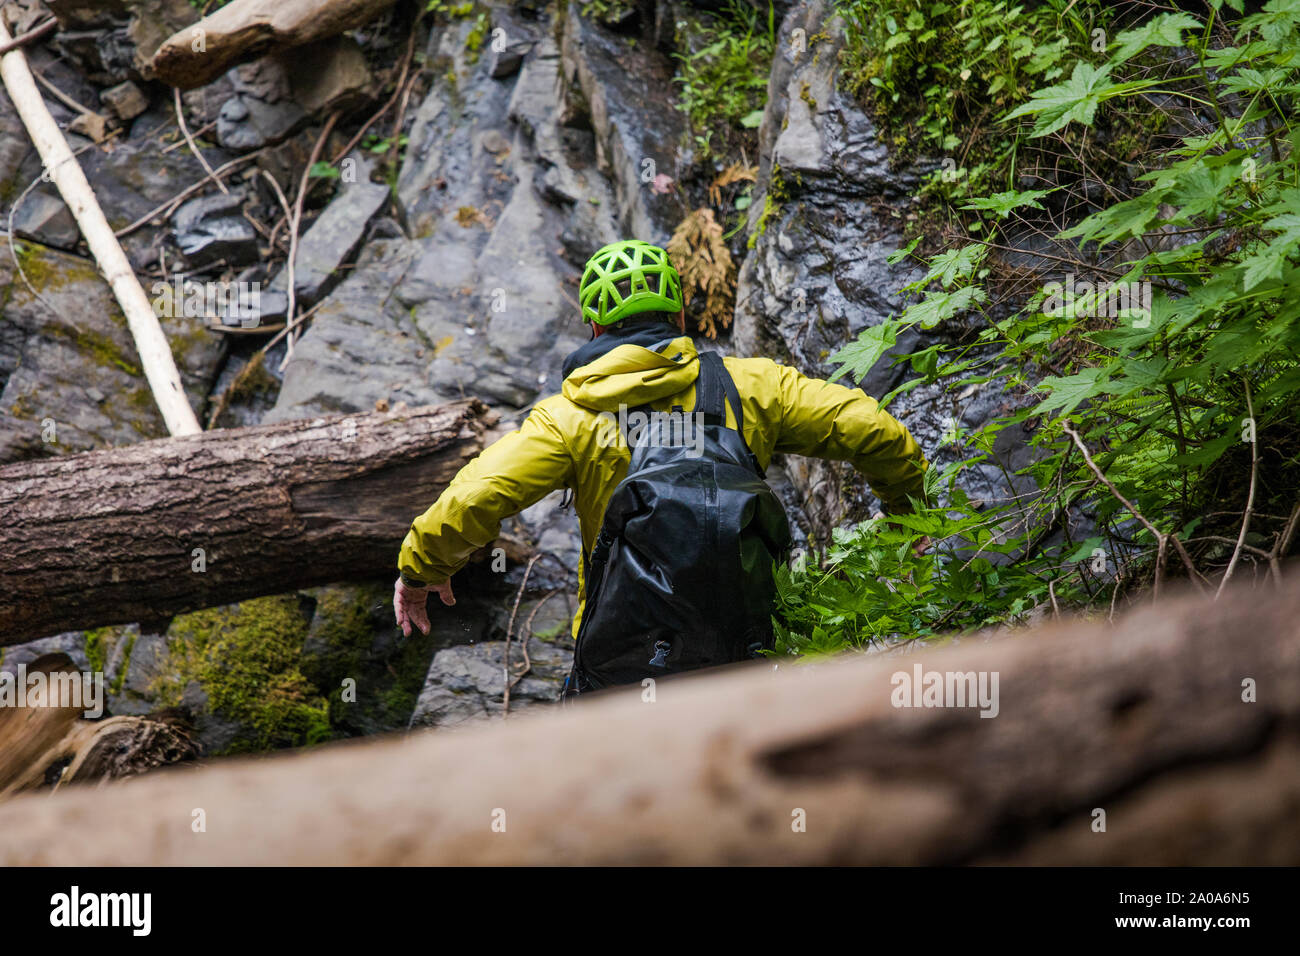 Hiker jumps moves quickly through a canyon full of obstacles. Stock Photo